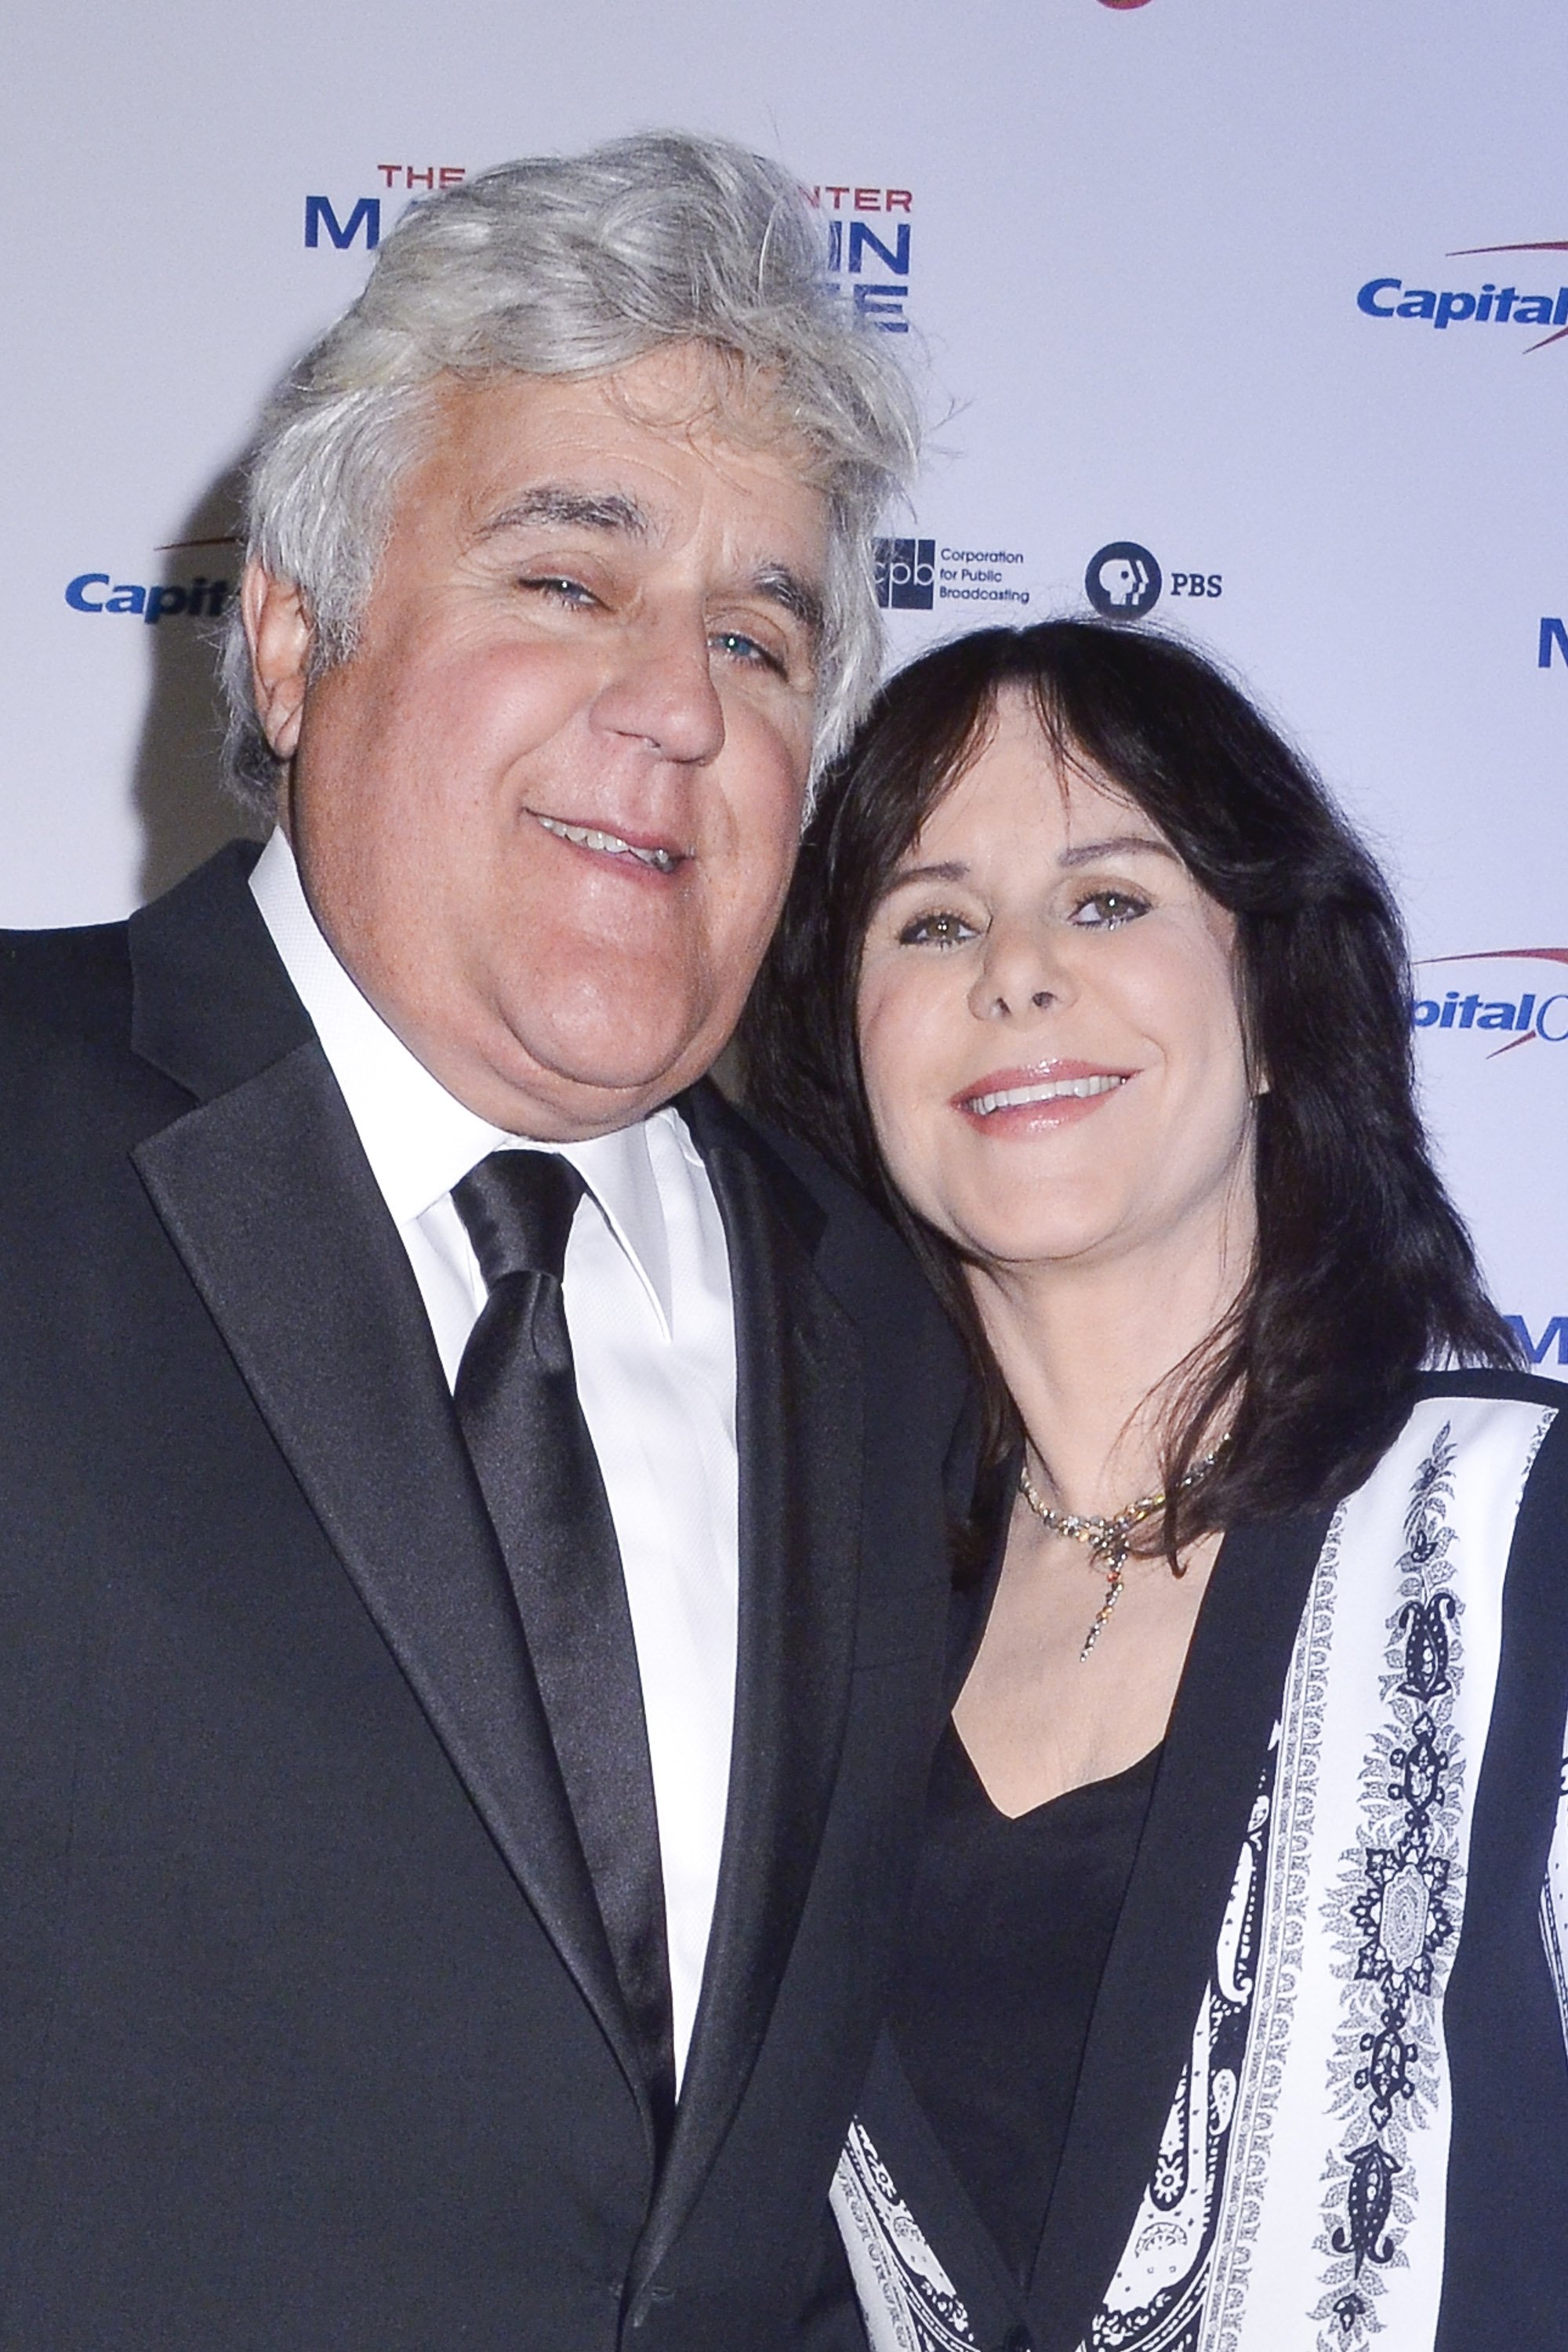 Jay and Mavis Leno during the Kennedy Center's Mark Twain Prize For American Humor on October 19, 2014, in Washington, DC. | Source: Getty Images